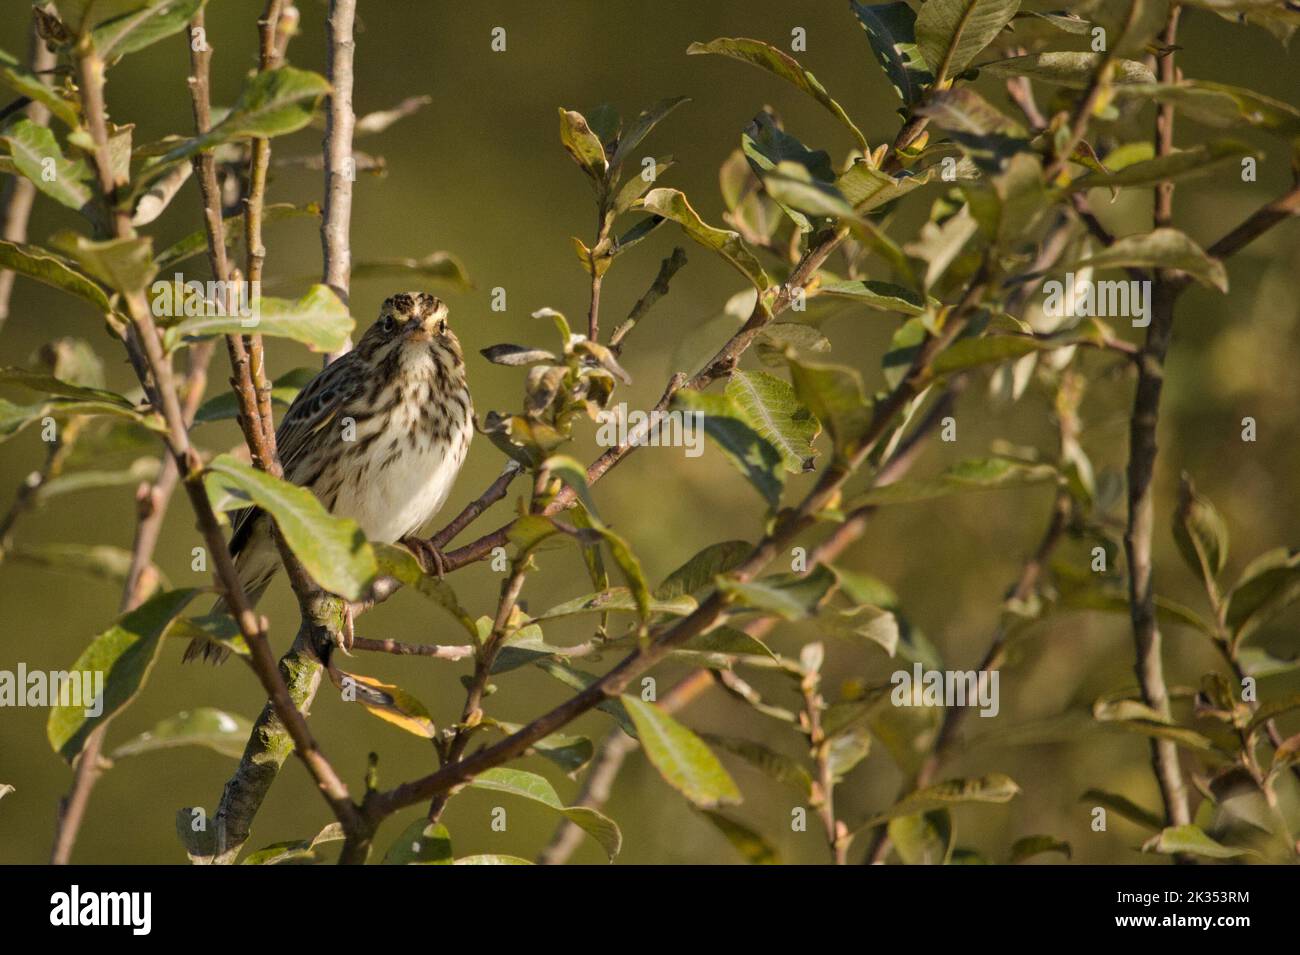 A savannah sparrow perched in the branches of a tree. Stock Photo